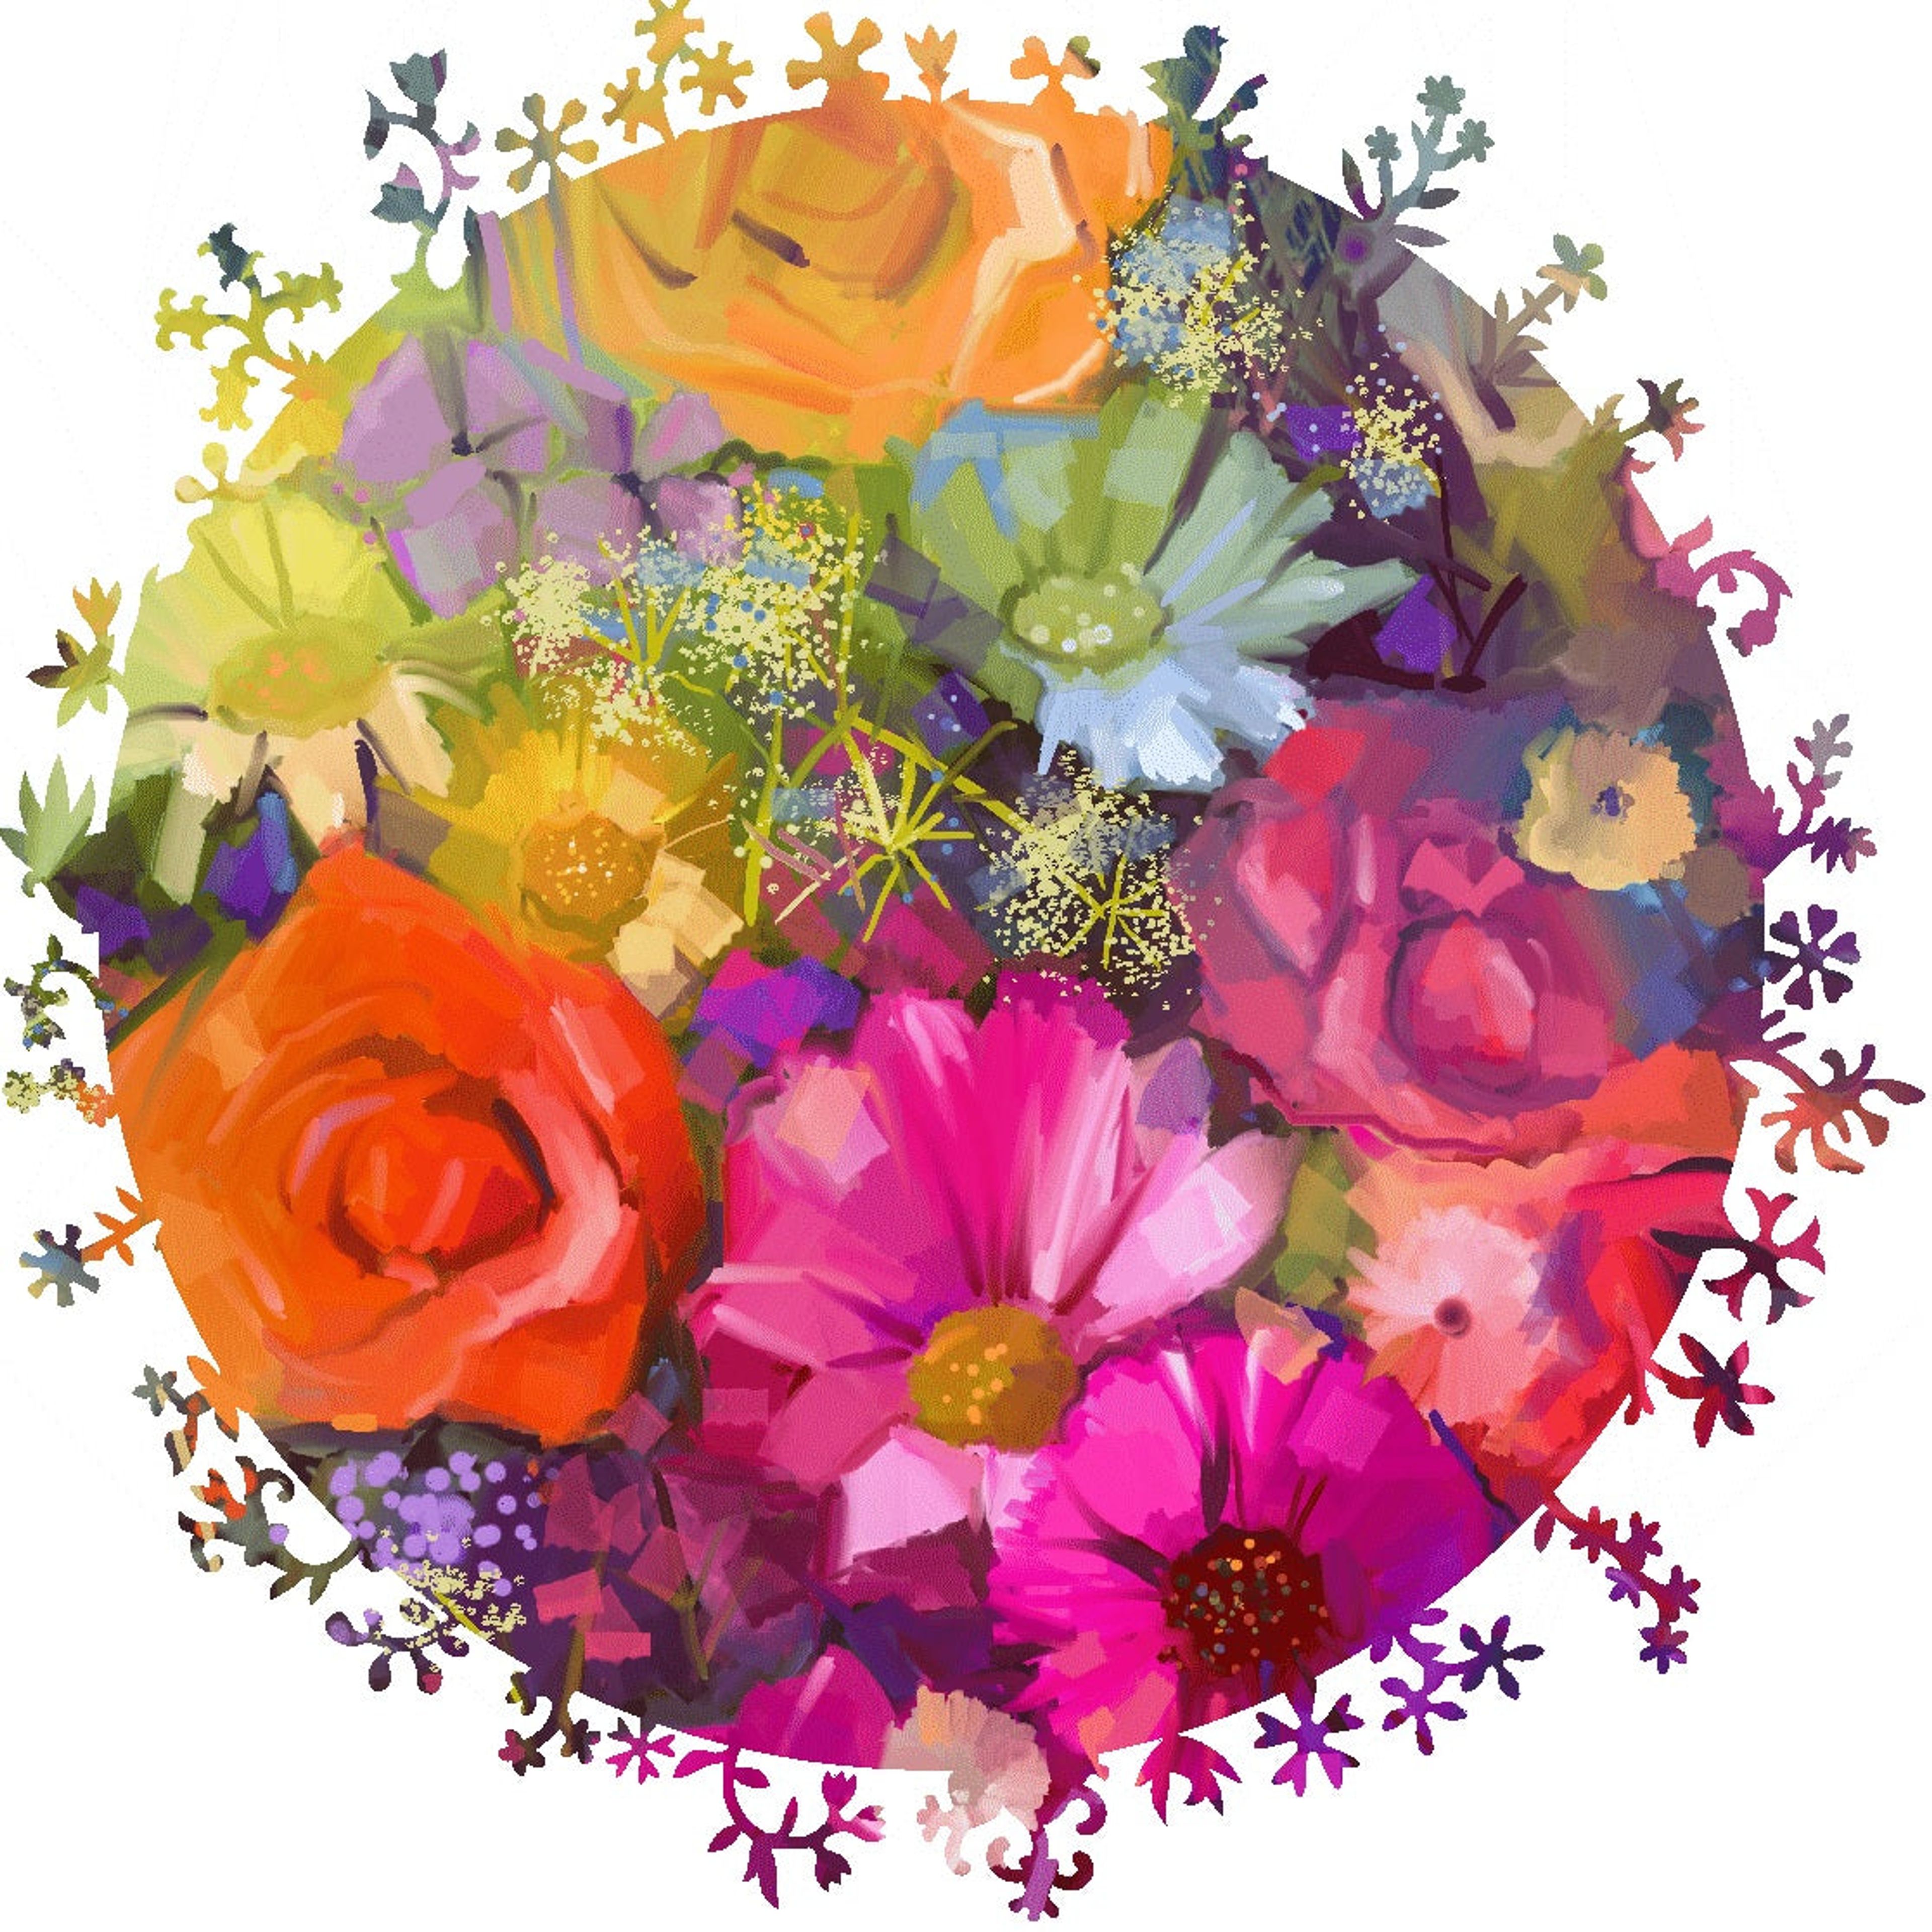 Circle of Flowers (392 Piece Shaped Flower Wooden Jigsaw Puzzle)